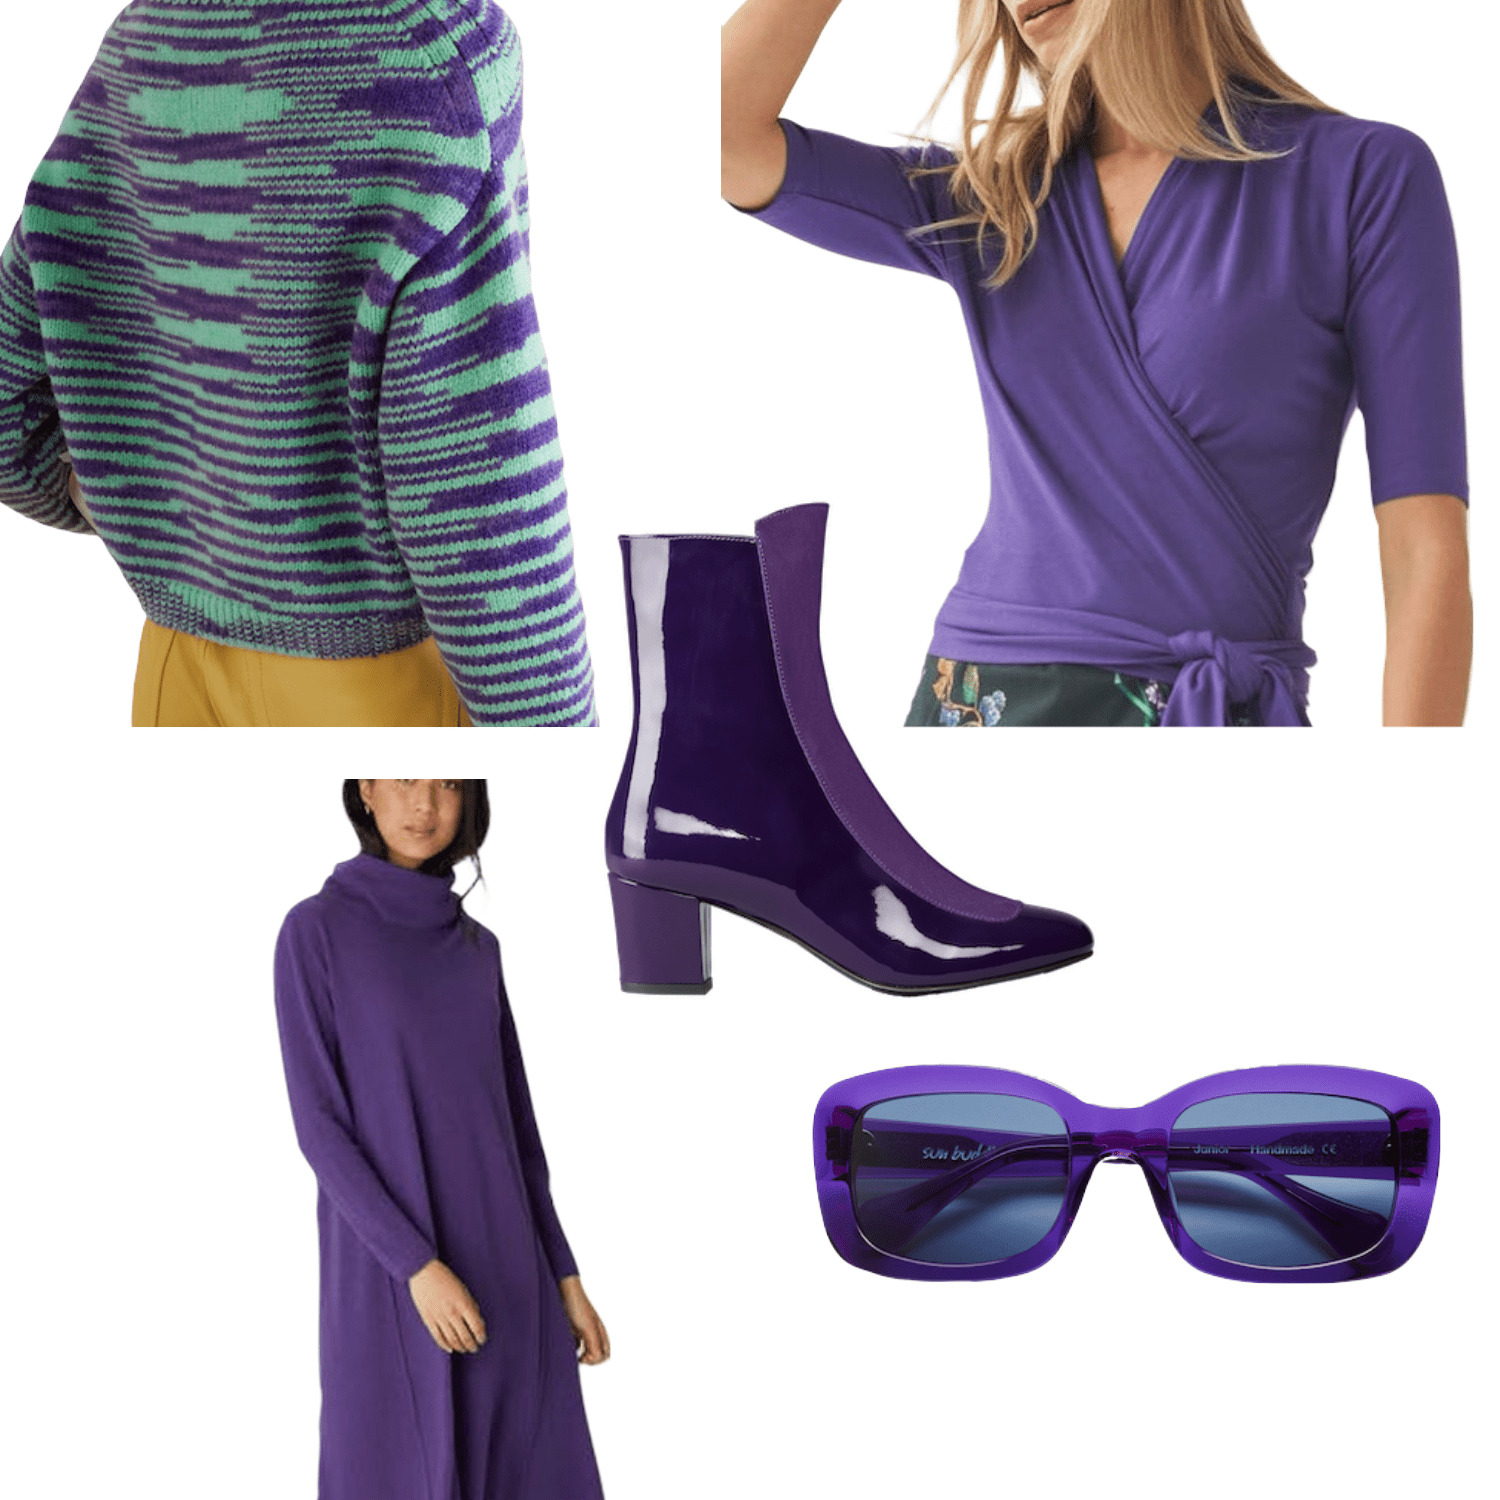 Ops&Ops No16 Purple Duo with striped knit, tie-waist top, knee-length dress and sunglasses